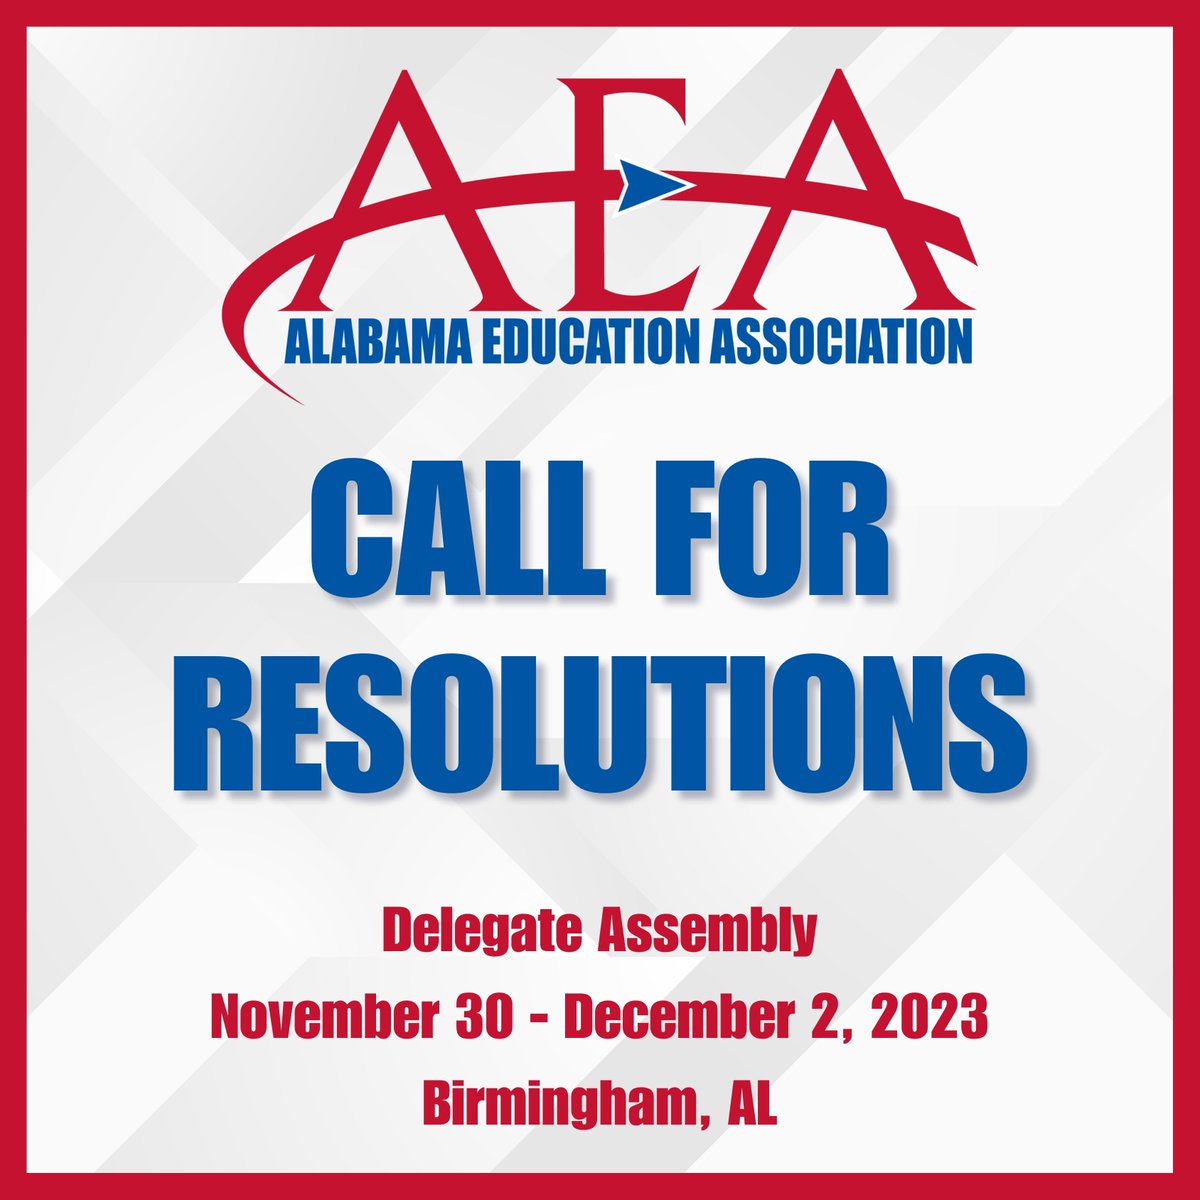 You have one week left to submit a resolution for Delegate Assembly! Make sure that your voice is heard by submitting a resolution form online at myAEA.org by Oct. 3 at 4:45 PM. All AEA members in good standing are invited to make a submission! #myAEA